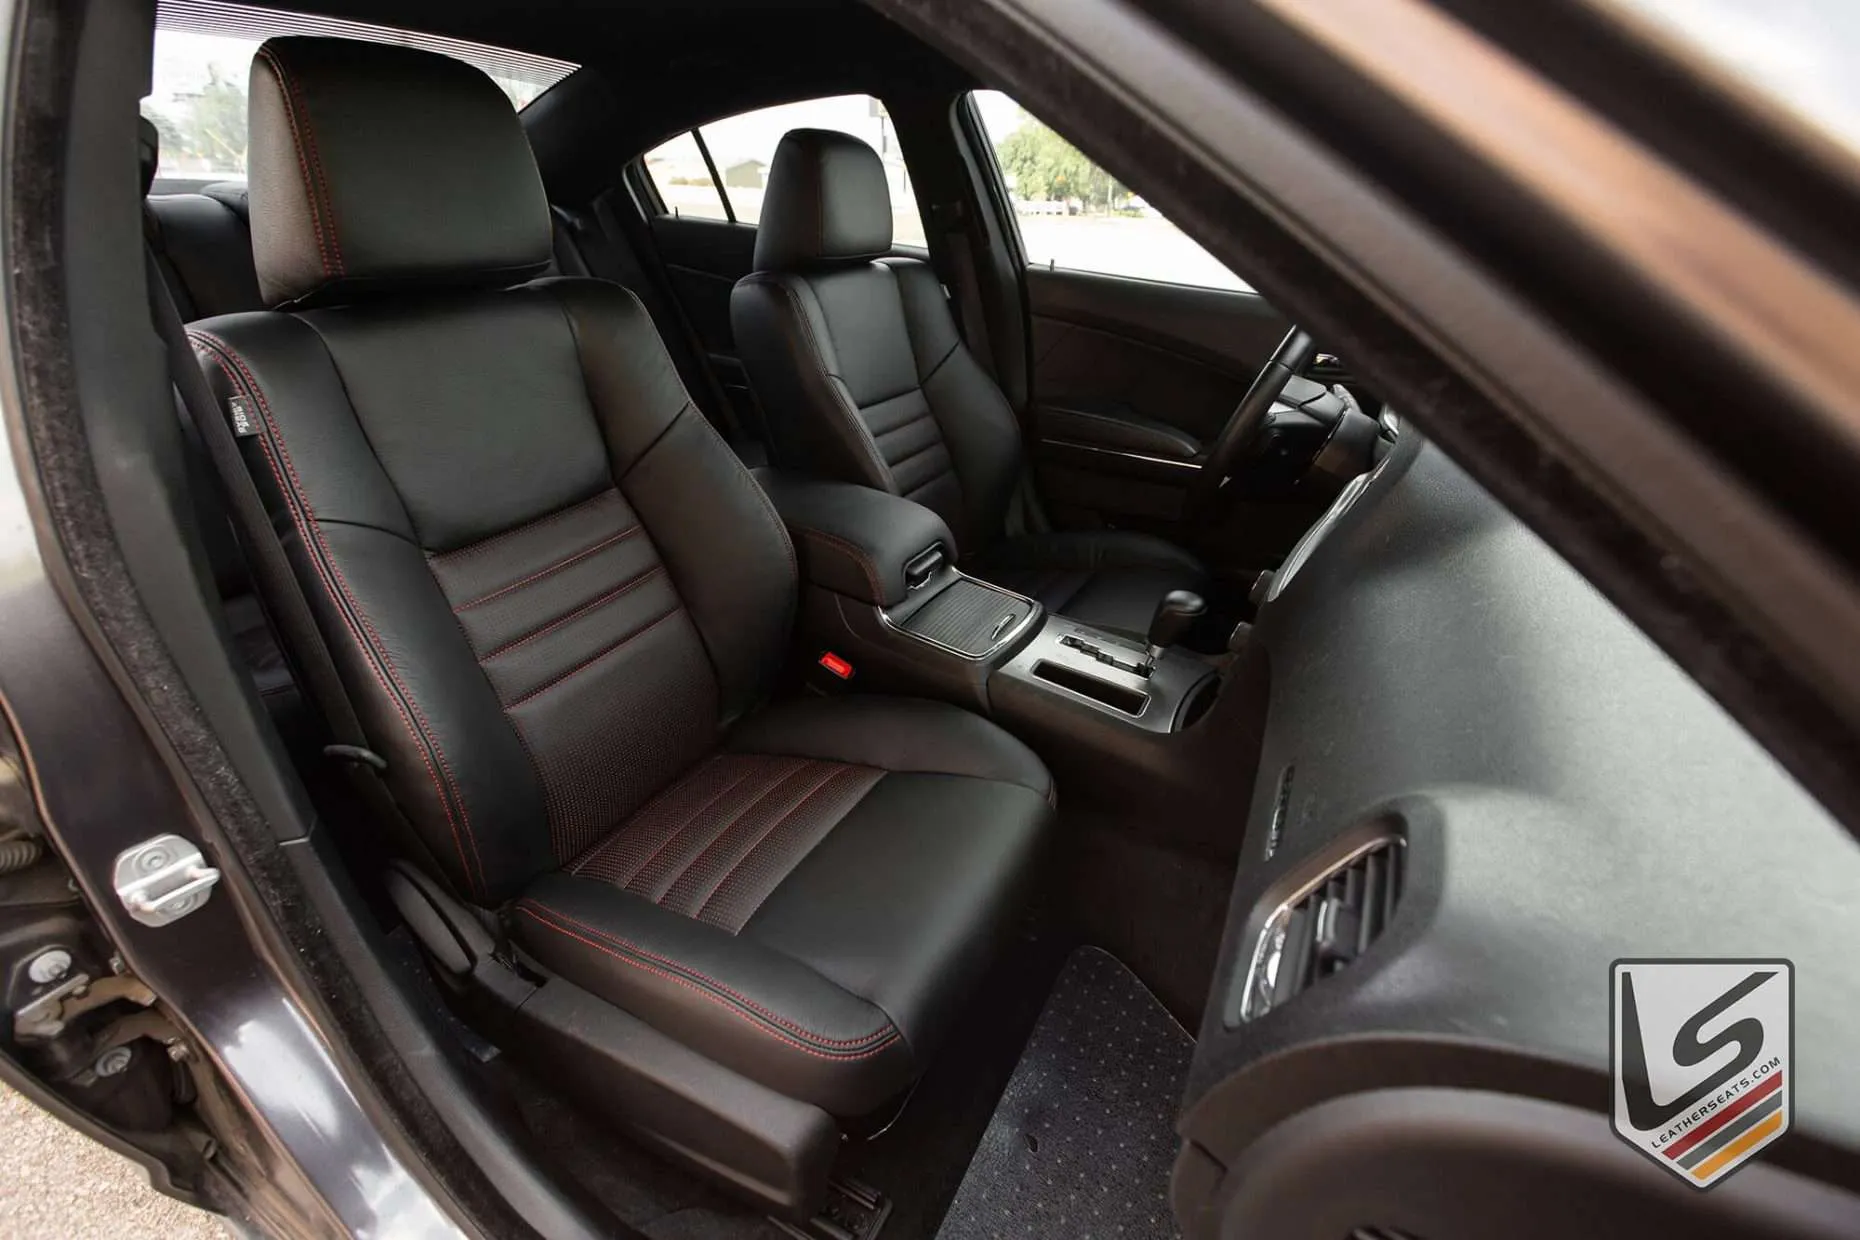 Front seat passenger view of Dodge Charger with leather seats